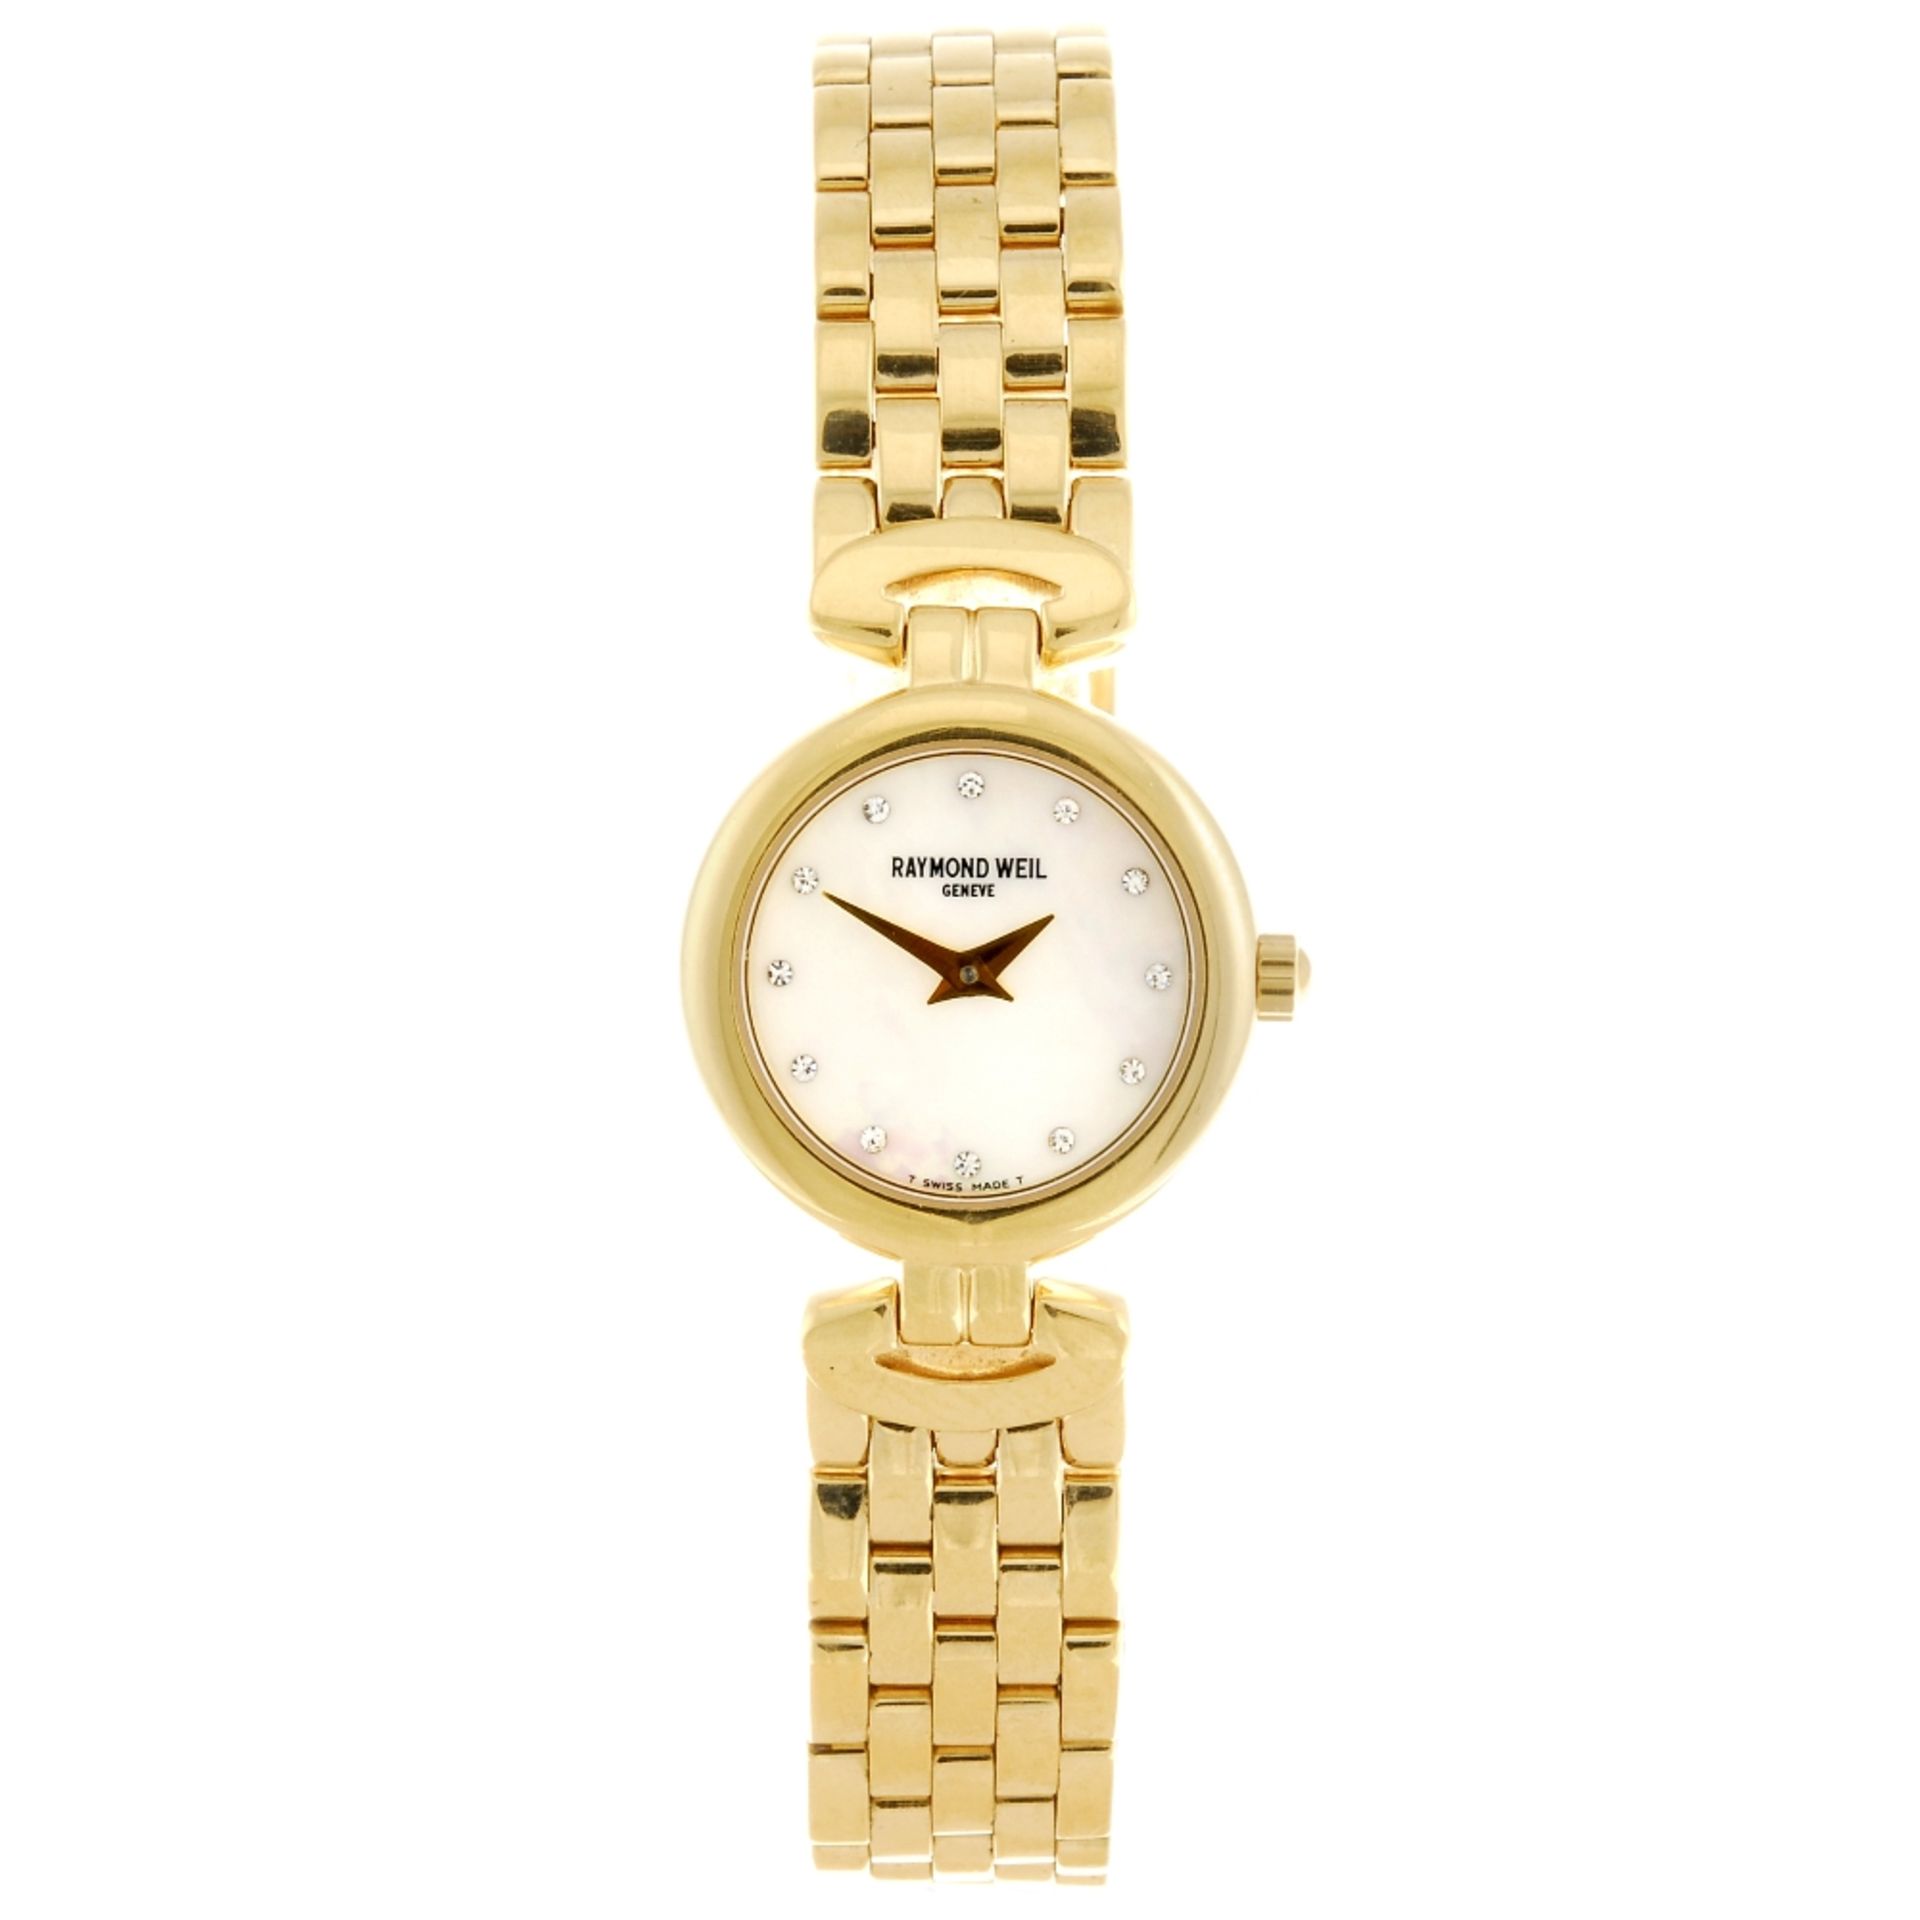 RAYMOND WEIL - a lady`s bracelet watch. Quartz movement. Mother-of-pearl dial with white stone hour